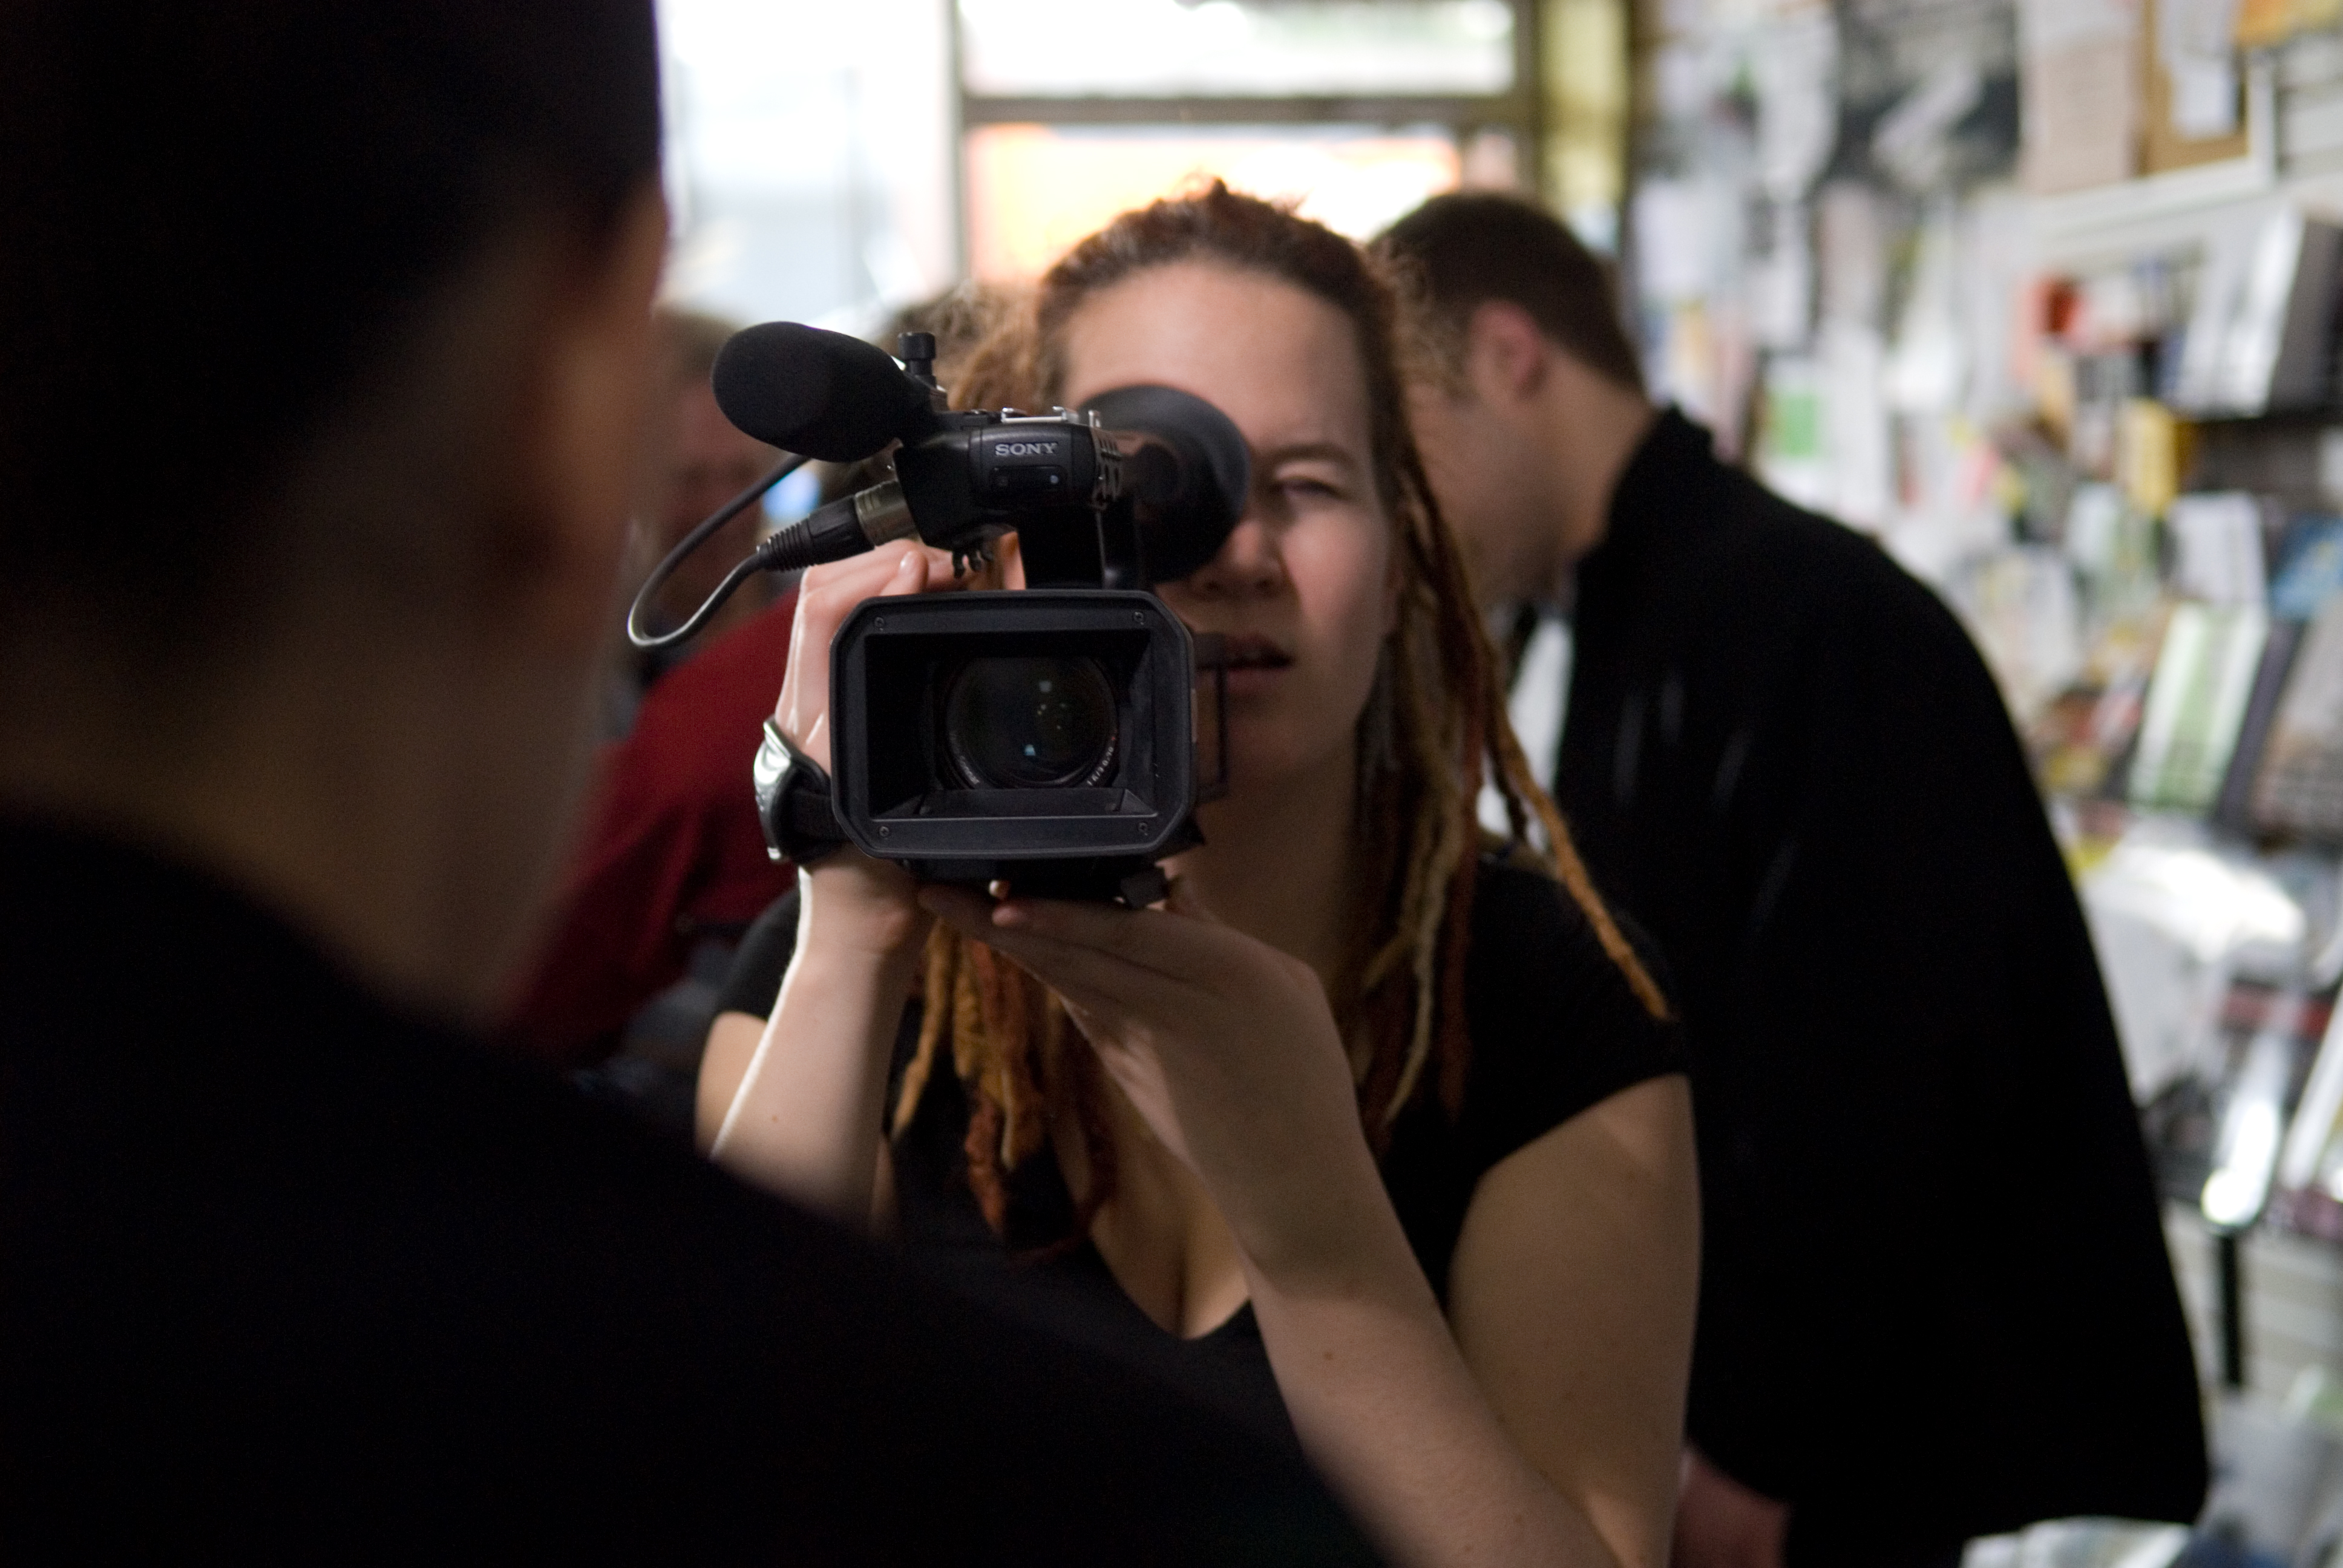 Amy Belling - DOP on the set of EDNA BROWN